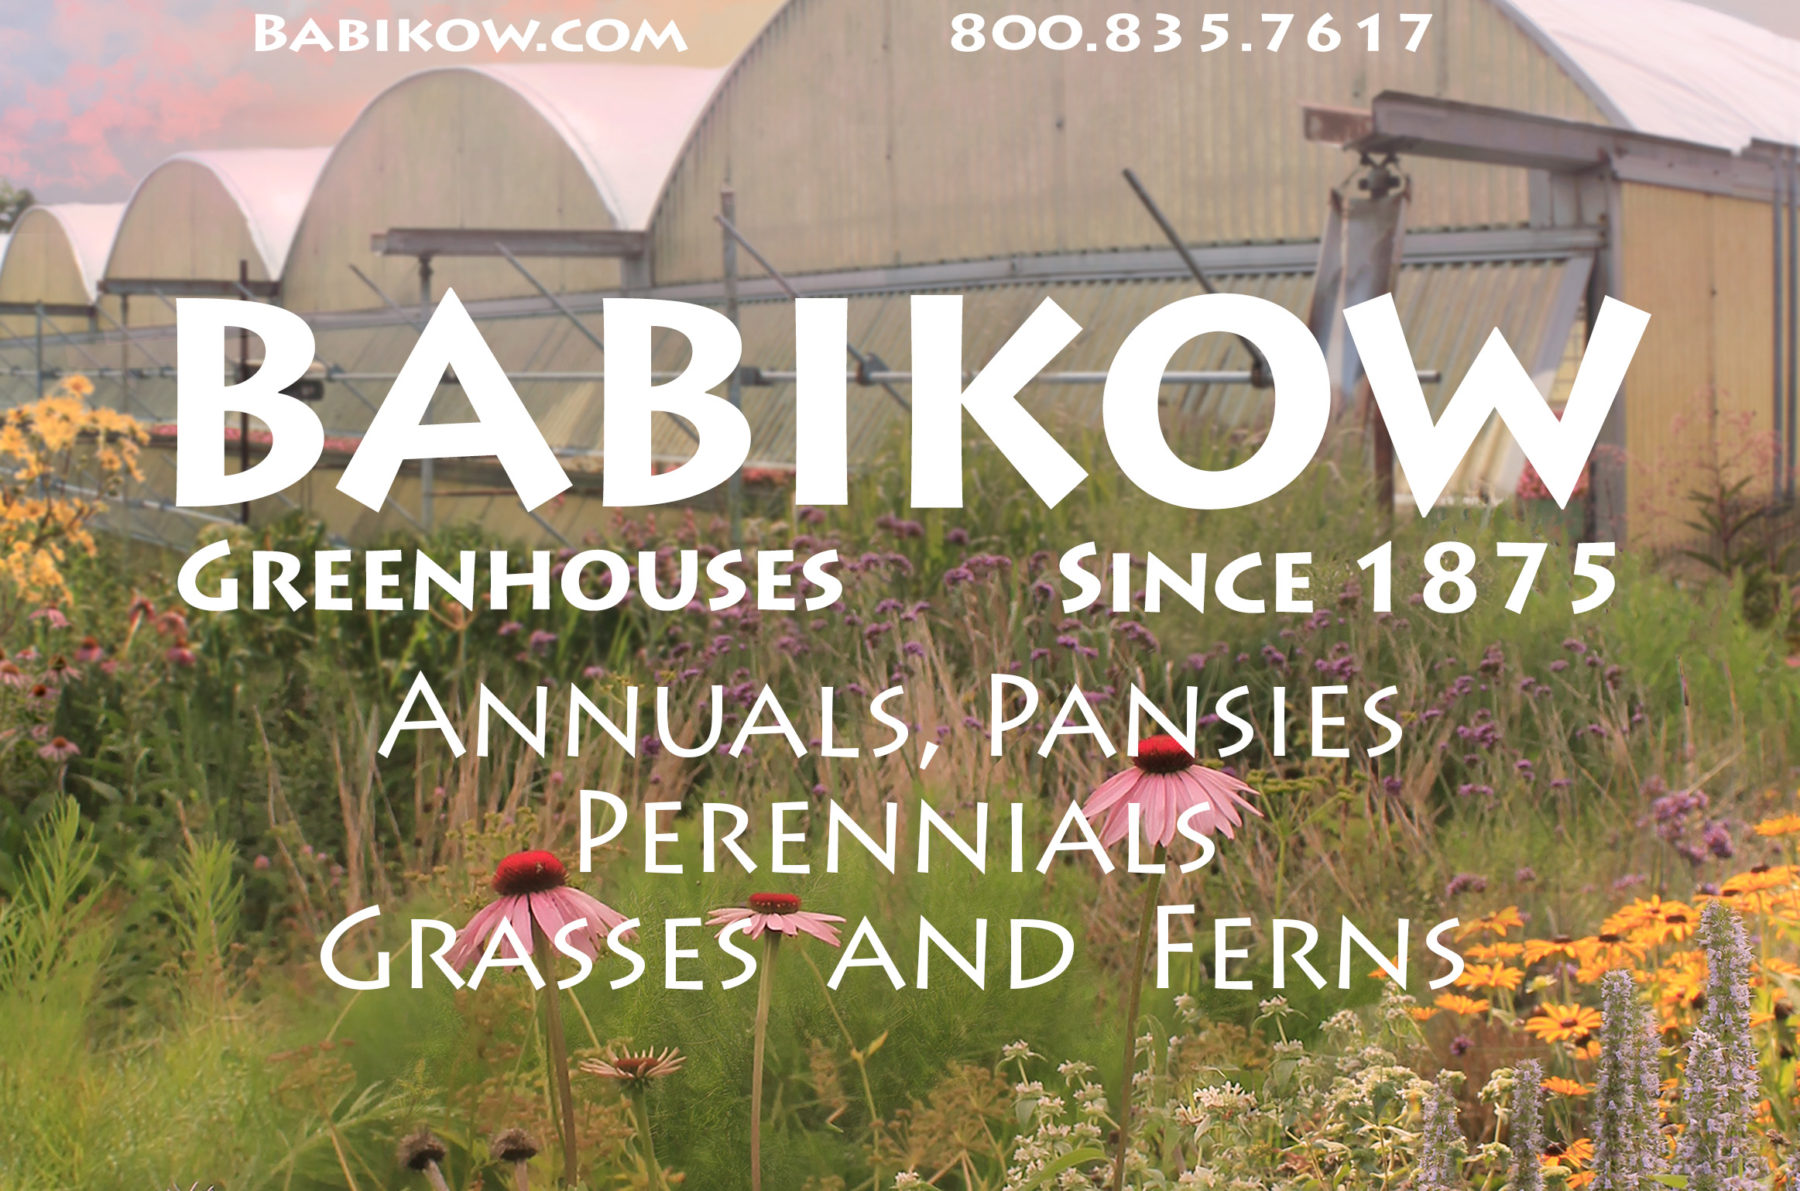 Babikow company logo over image of greenhouses and flower. Text reads "Babikow Greenhouses since 1875. Annuals, Pansies, Perennials, Grasses and Ferns